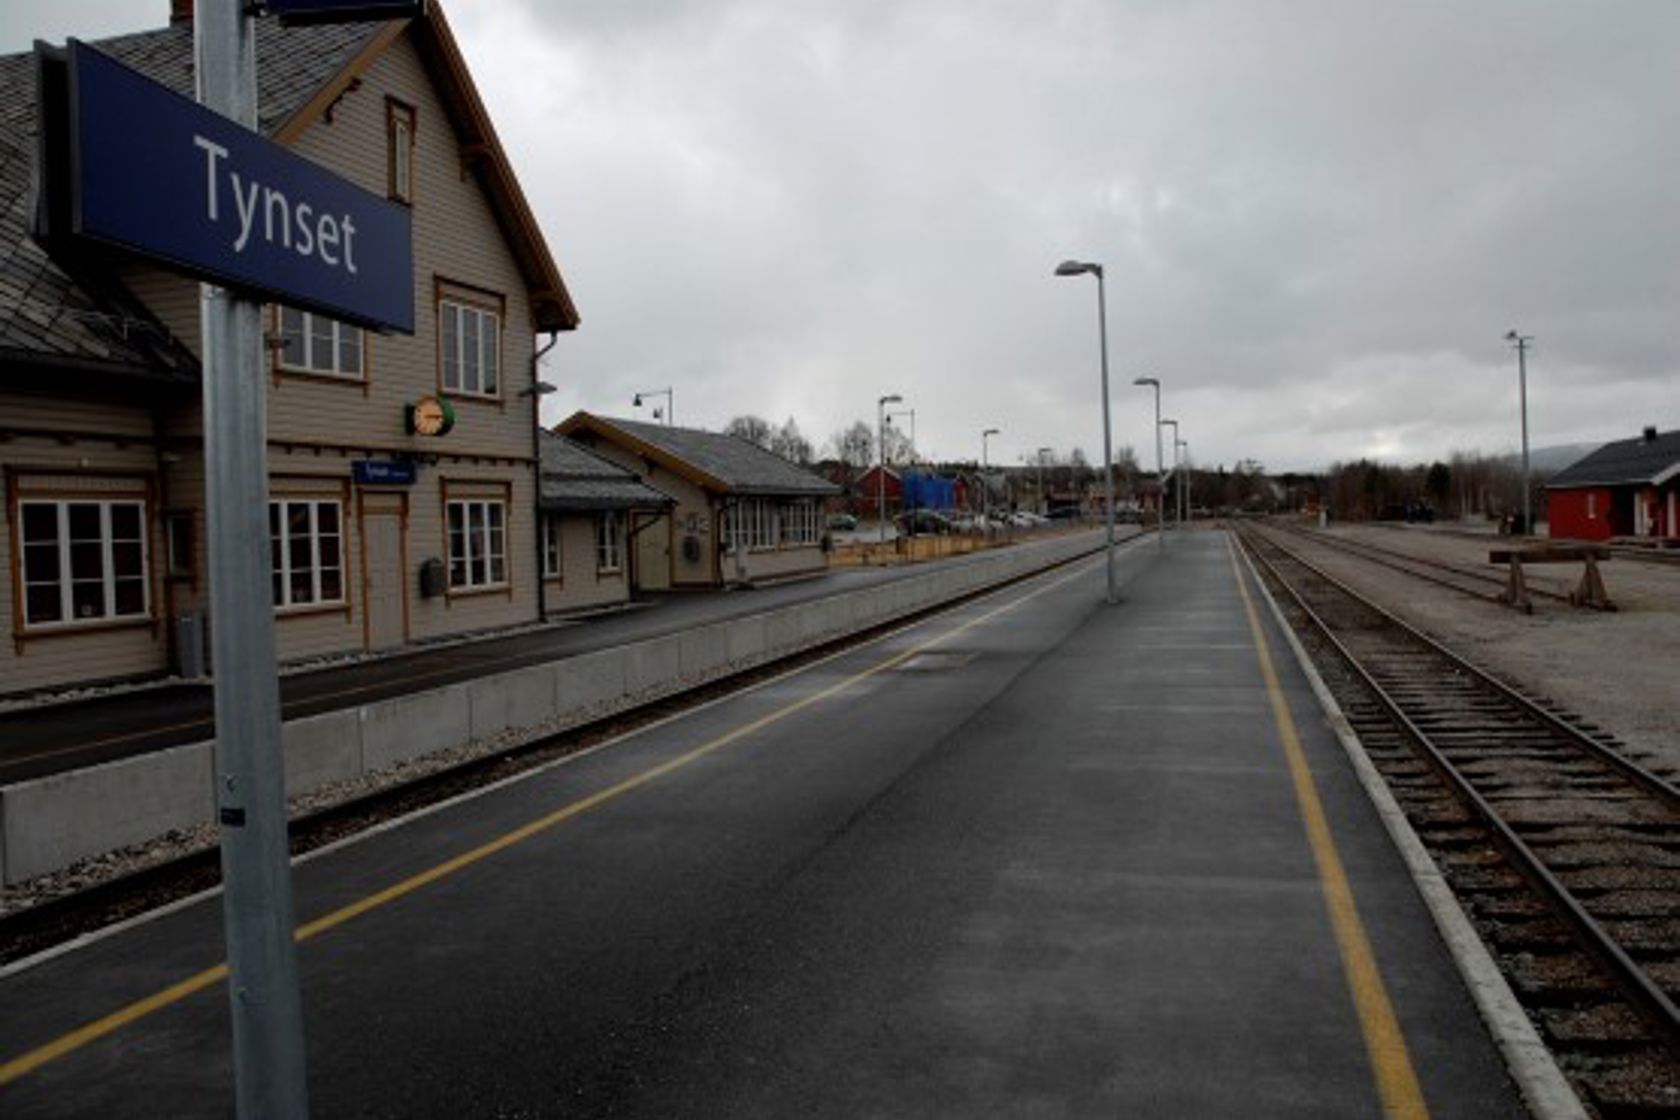 Exterior view of Tynset station